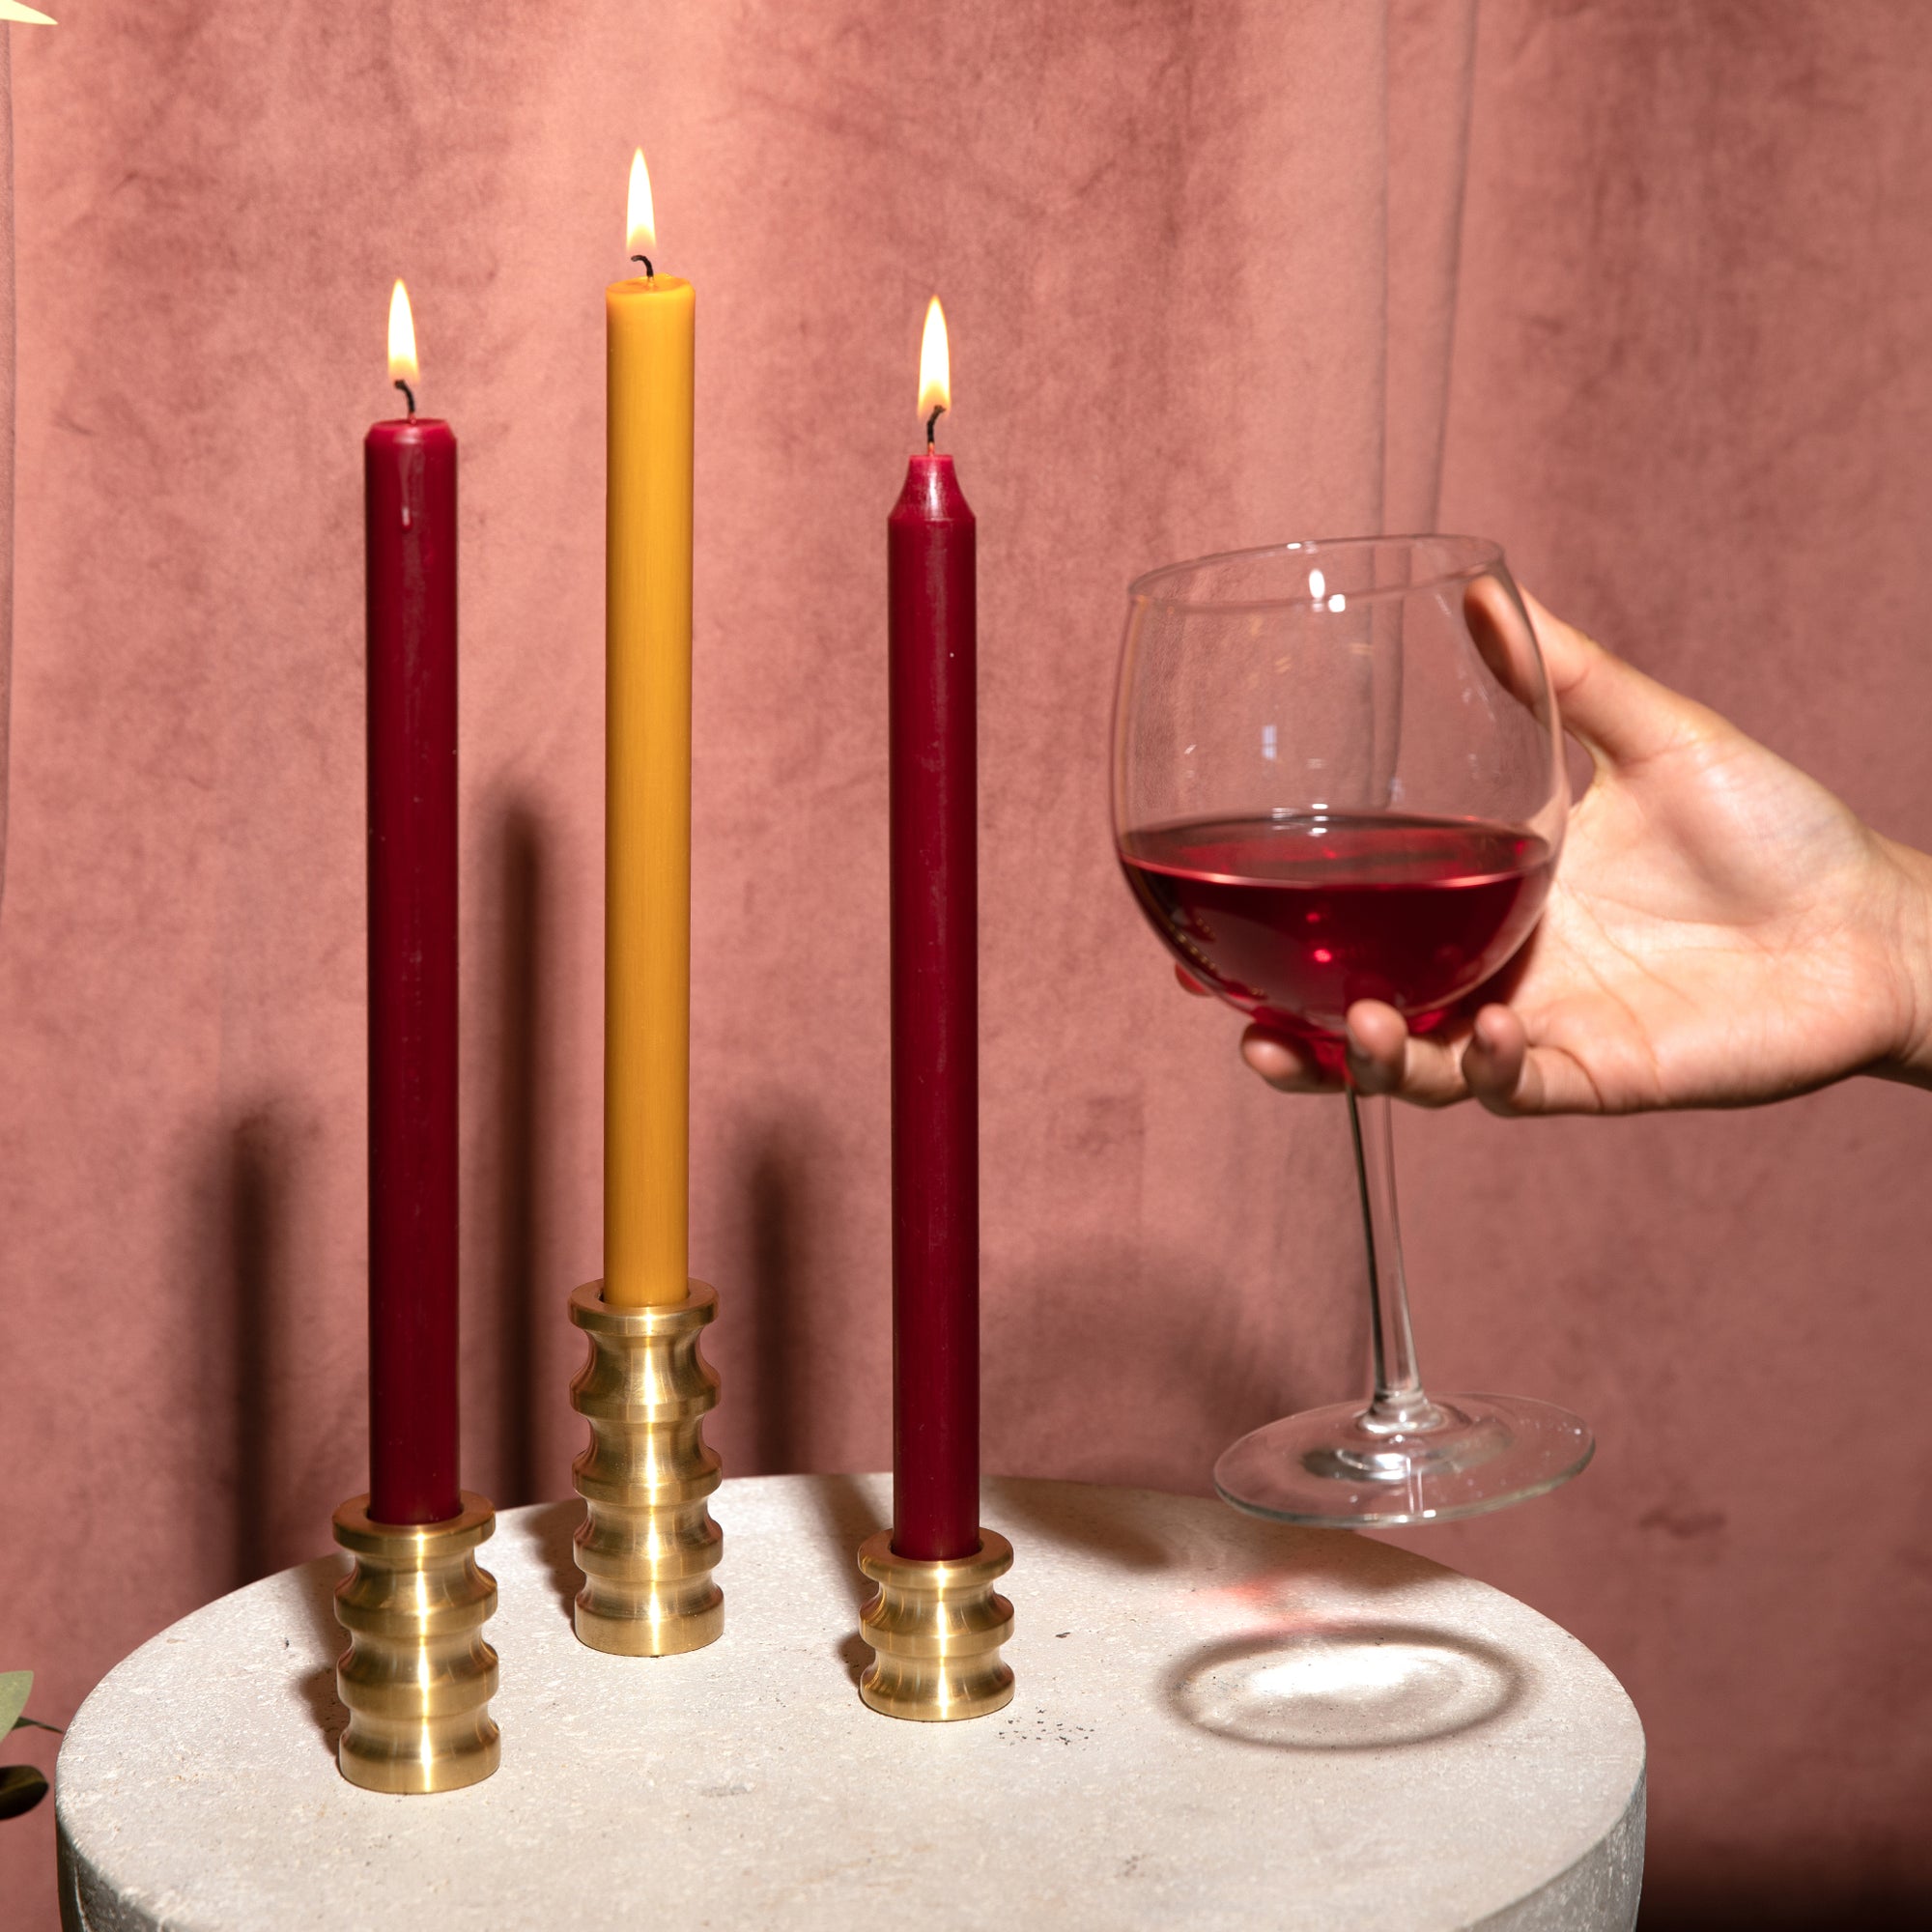 Burgundy and Harvest Gold candles